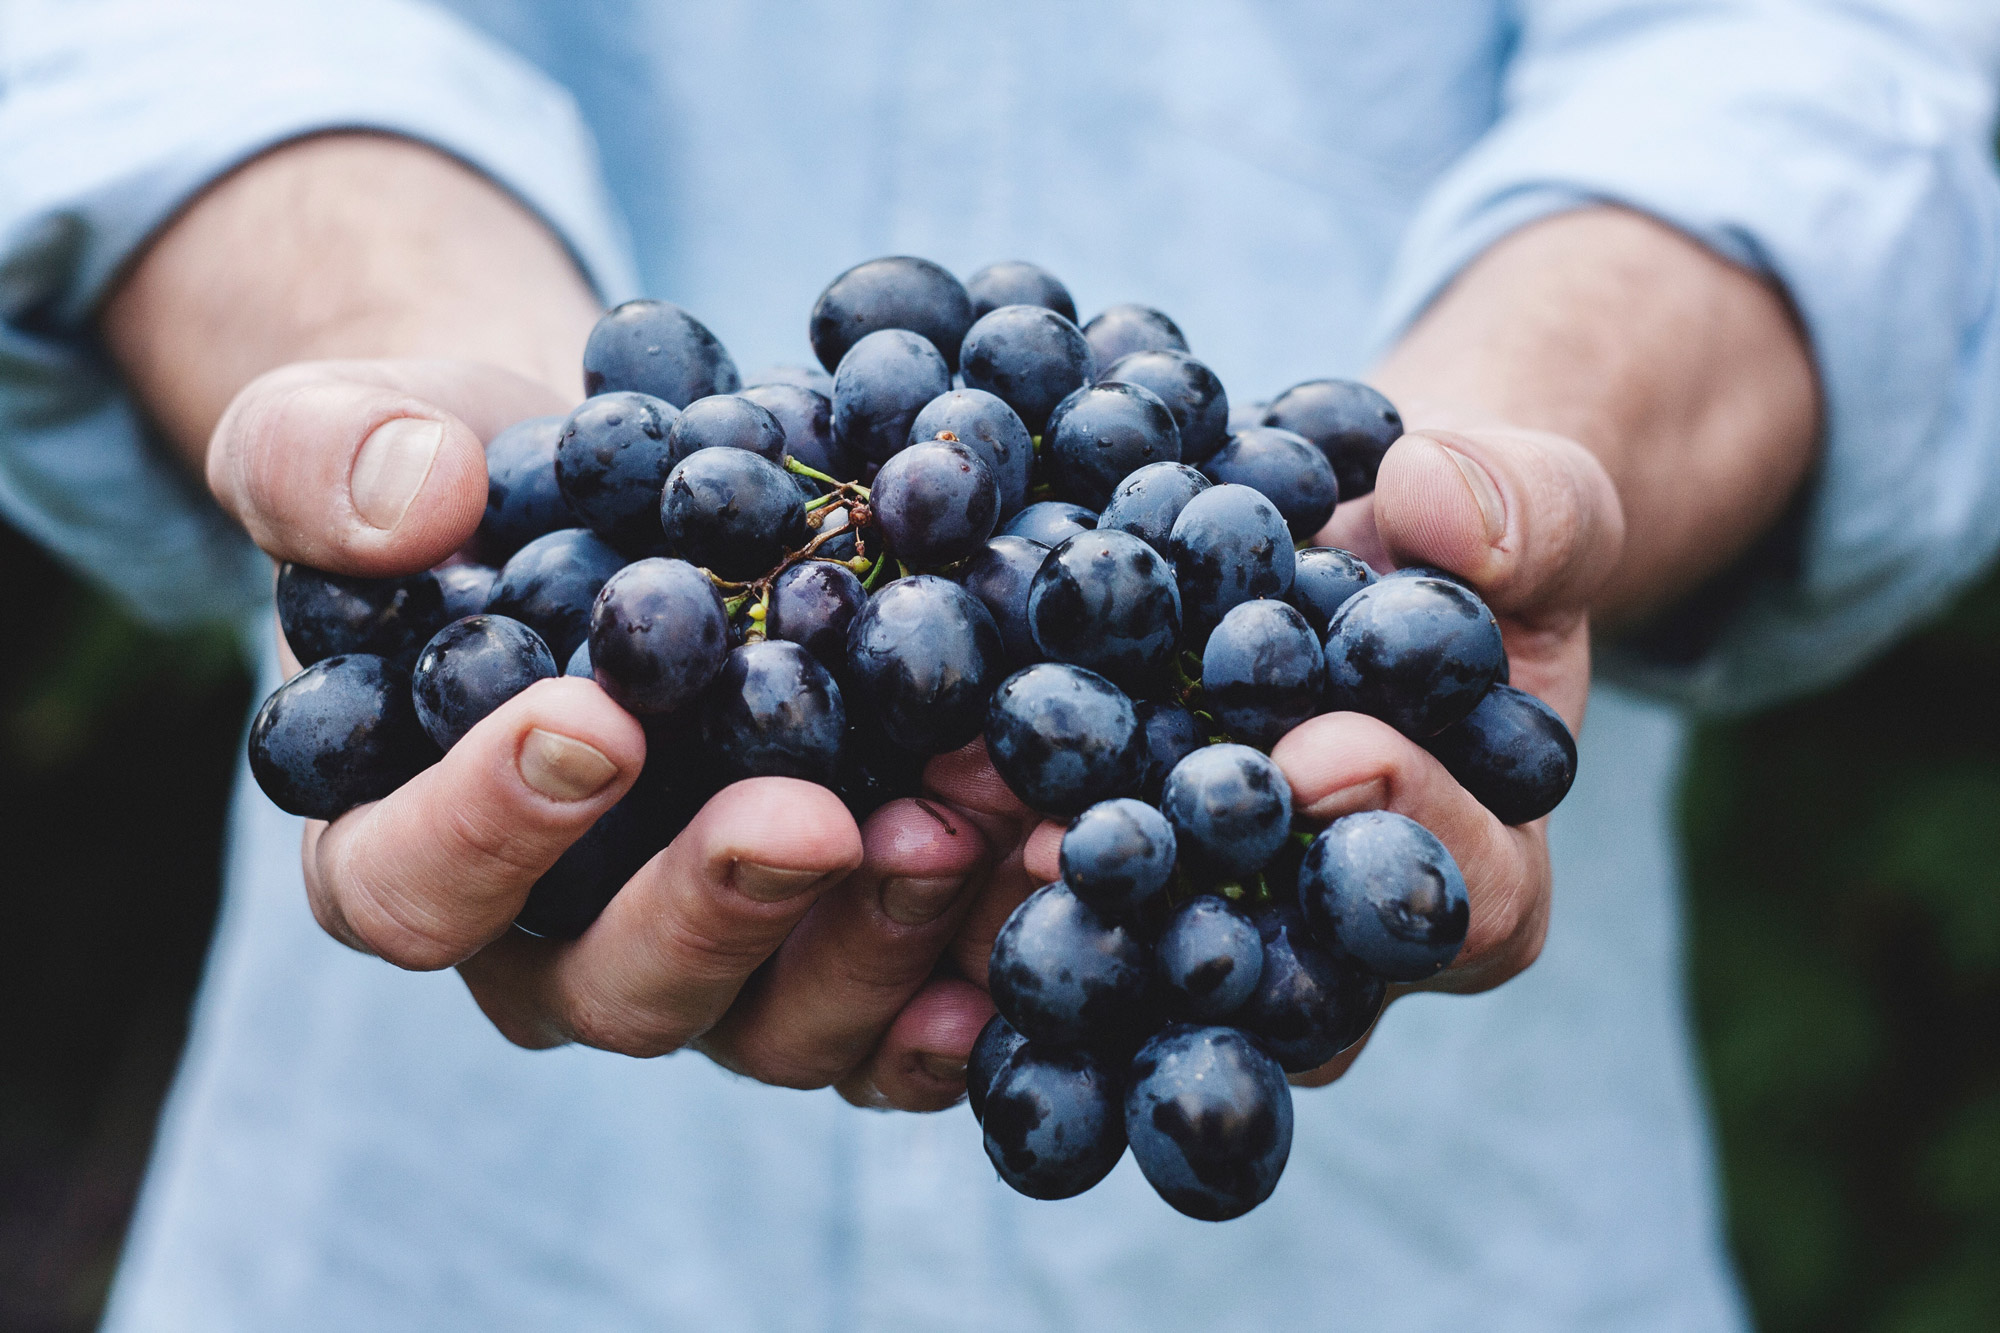 Hands holding a bunch of dark wine grapes